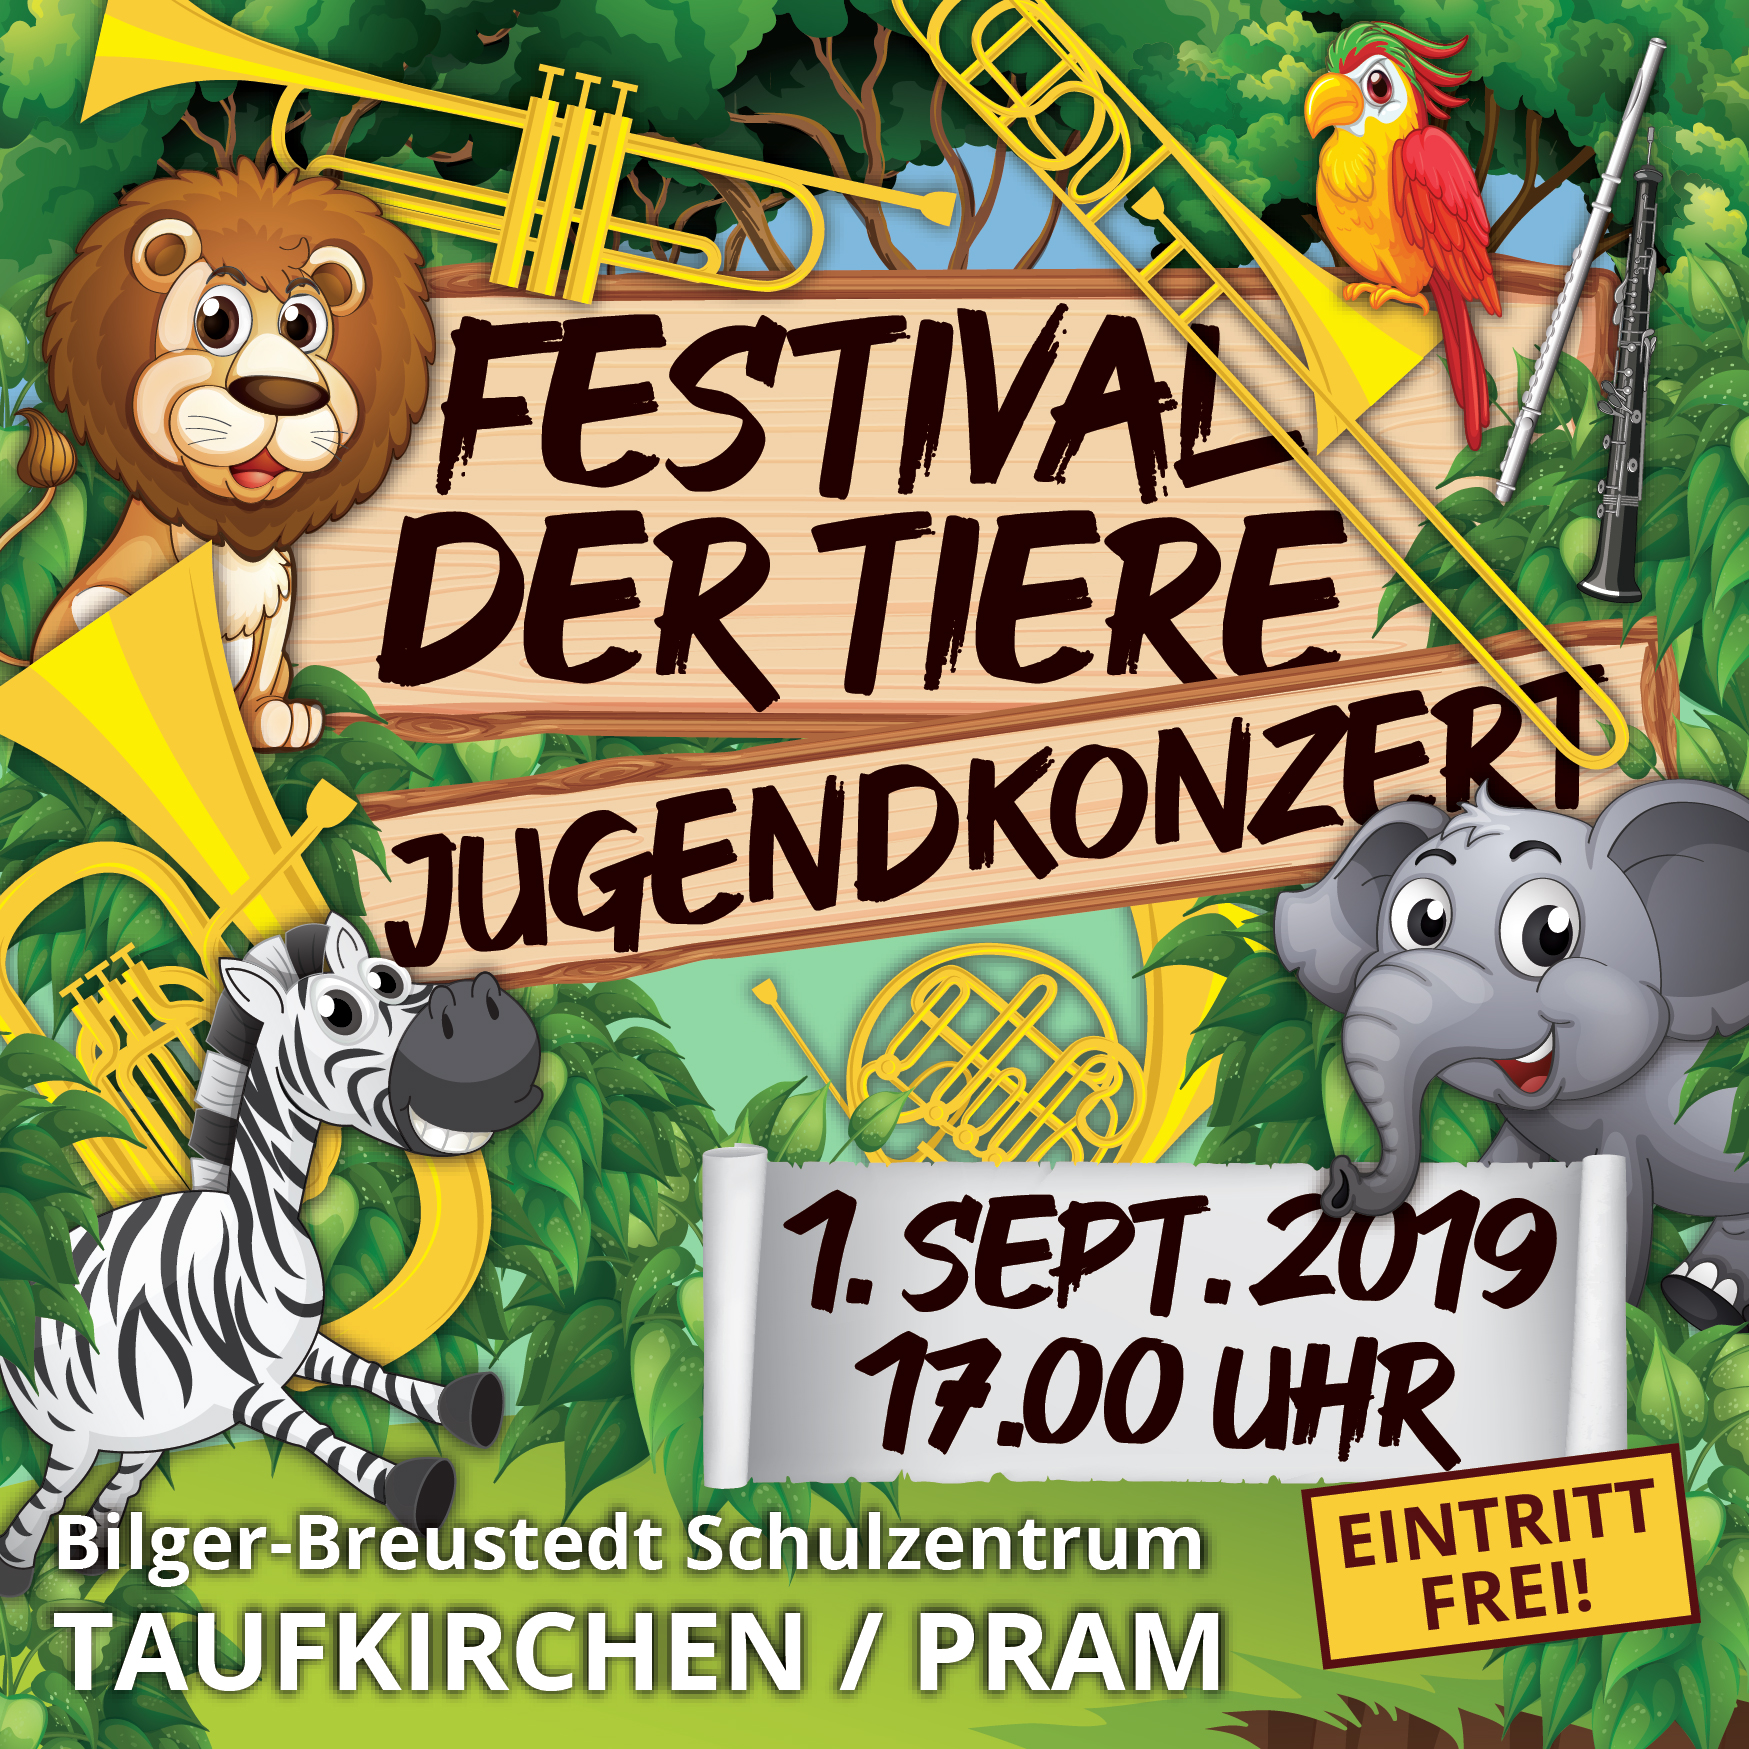 You are currently viewing Jugendkonzert – Festival der Tiere